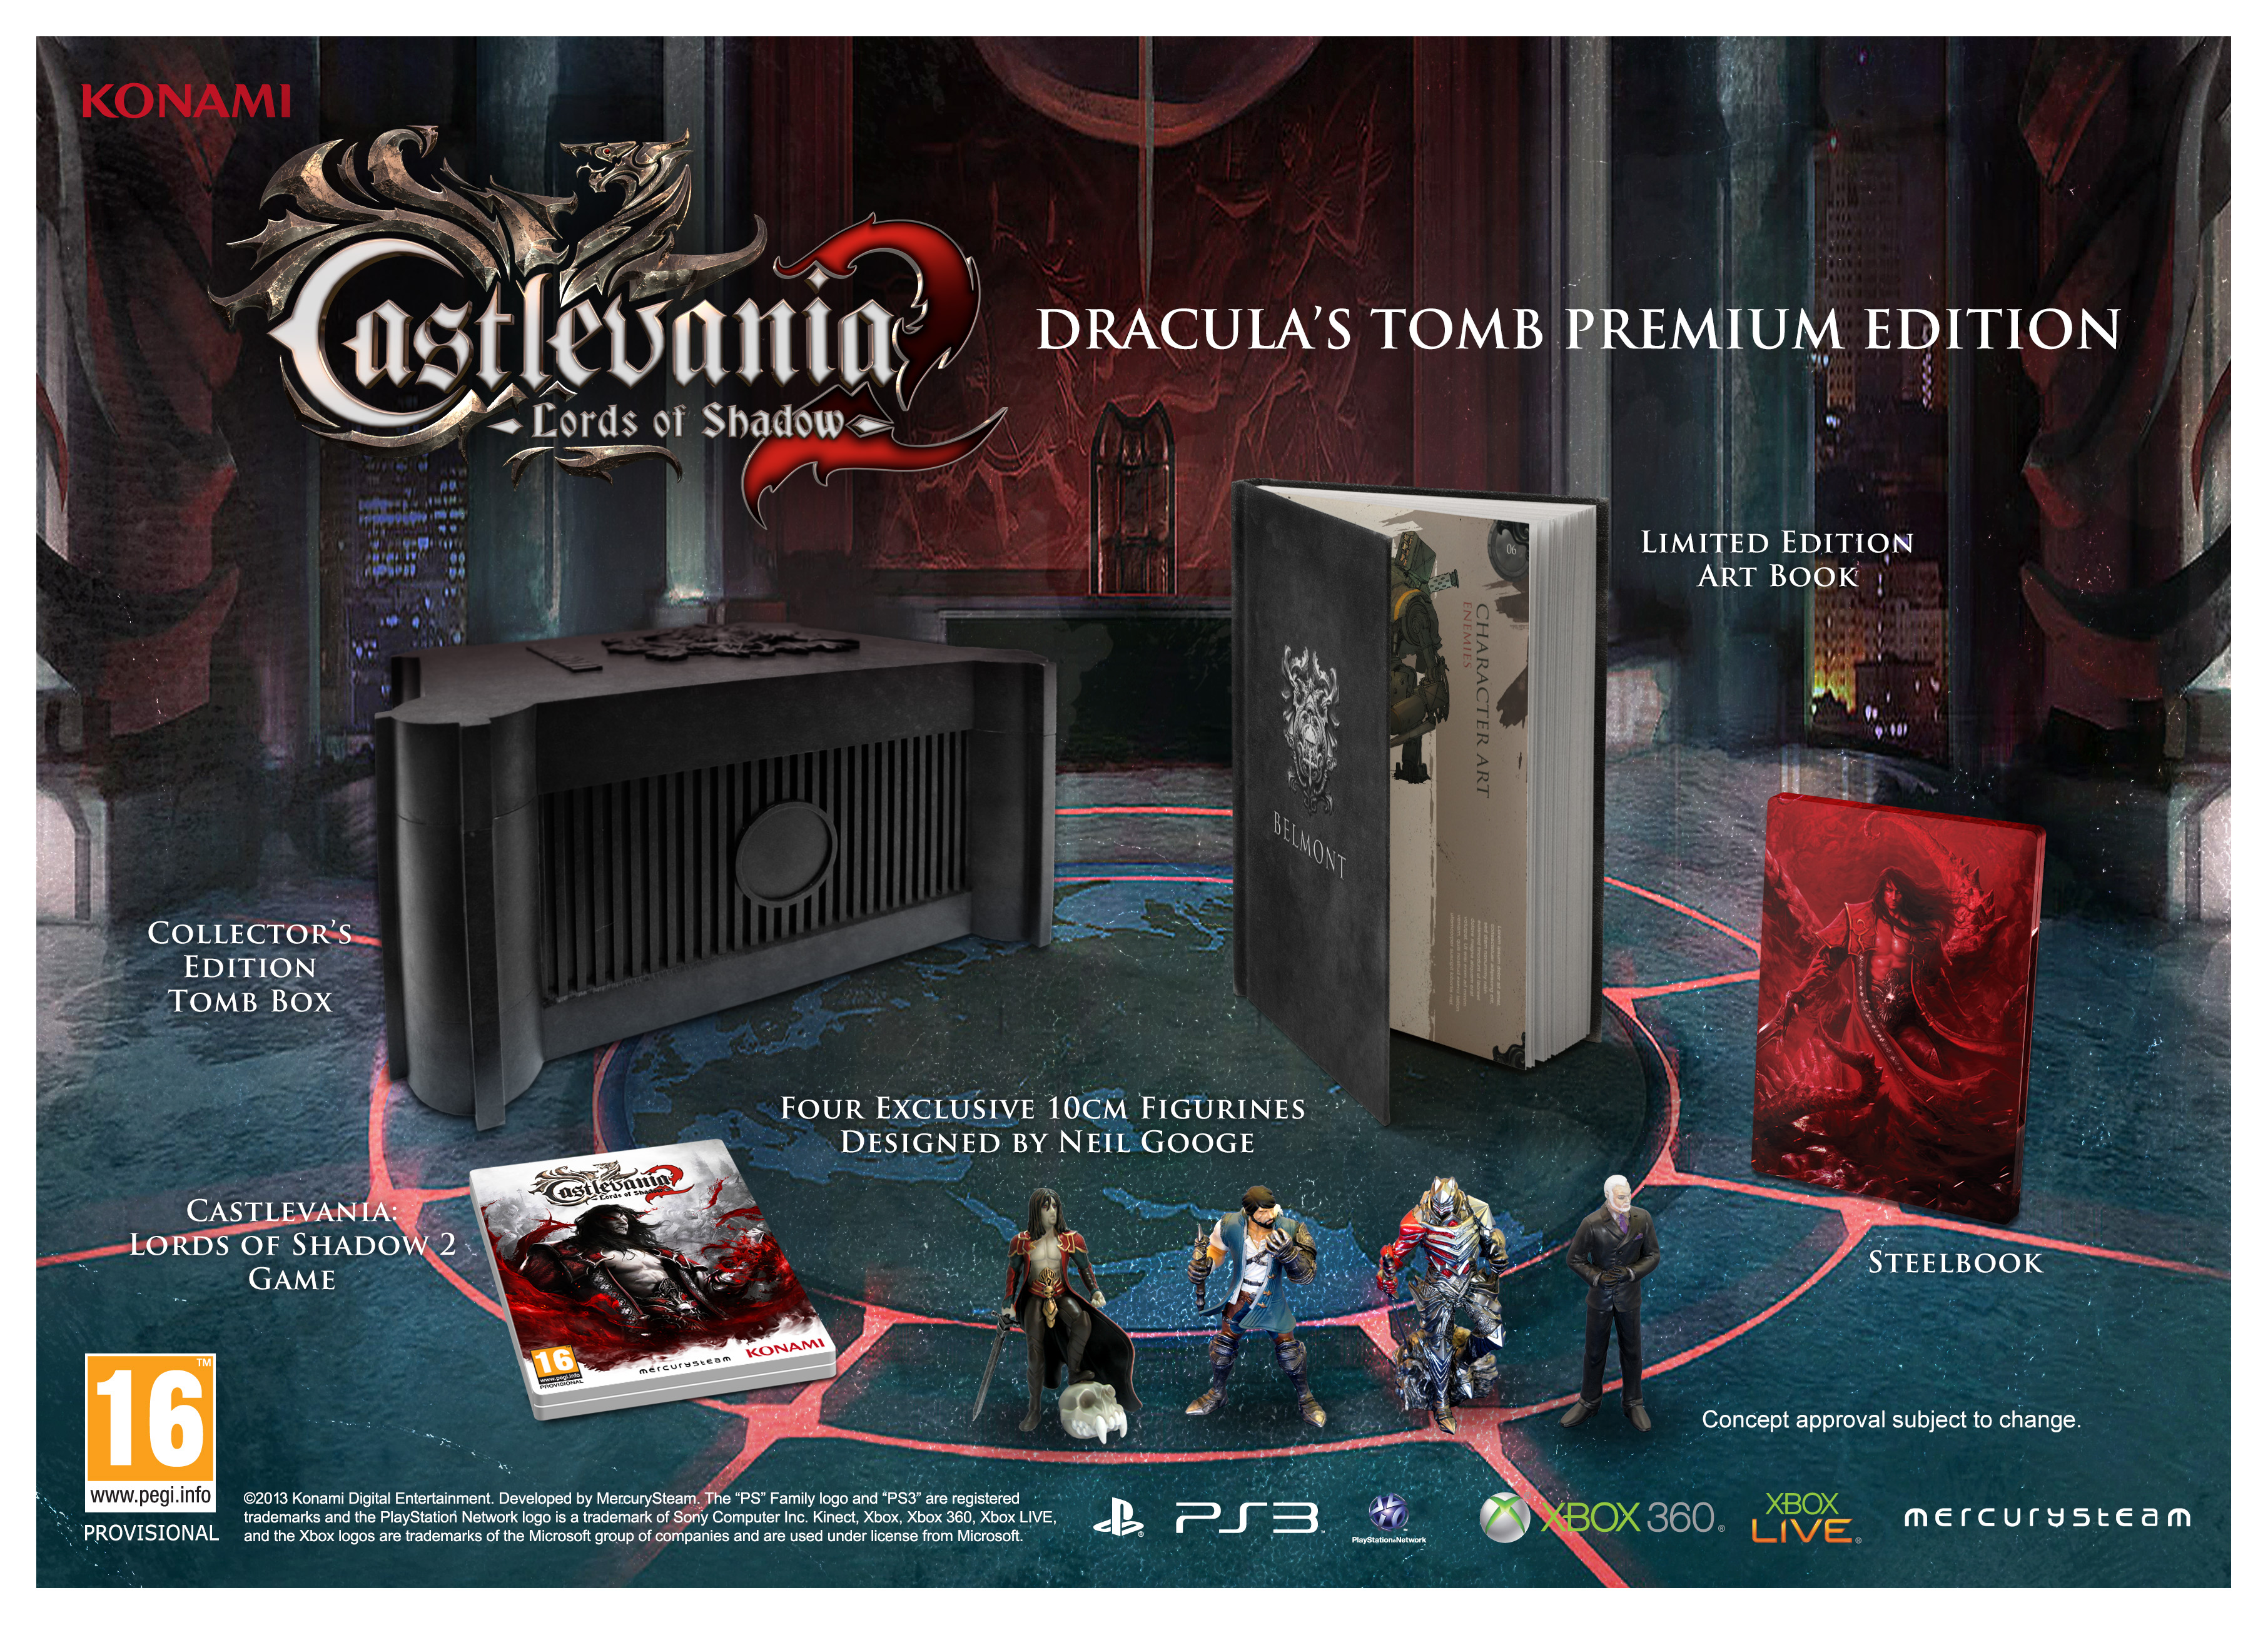 Castlevania Lords of Shadows 2 Dracula’s Tomb Premium Edition